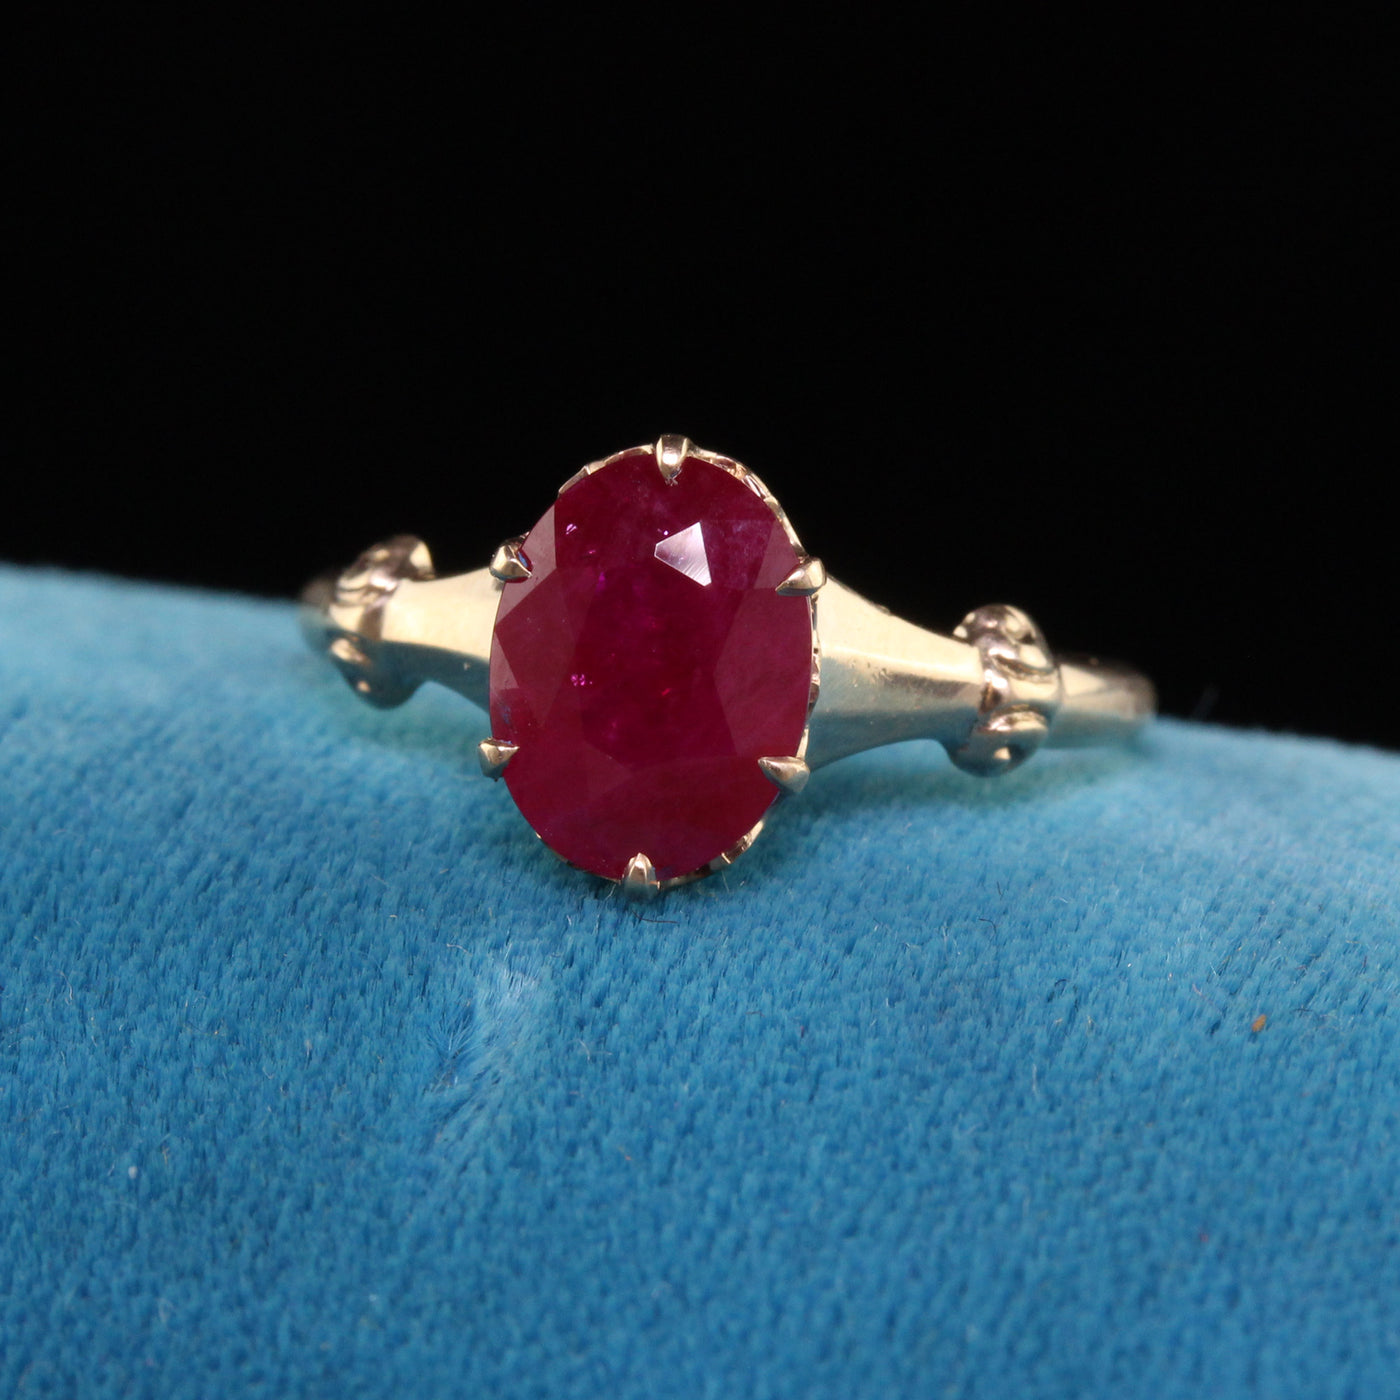 Antique Victorian 10K Yellow Gold Burmese Ruby Engagement Ring